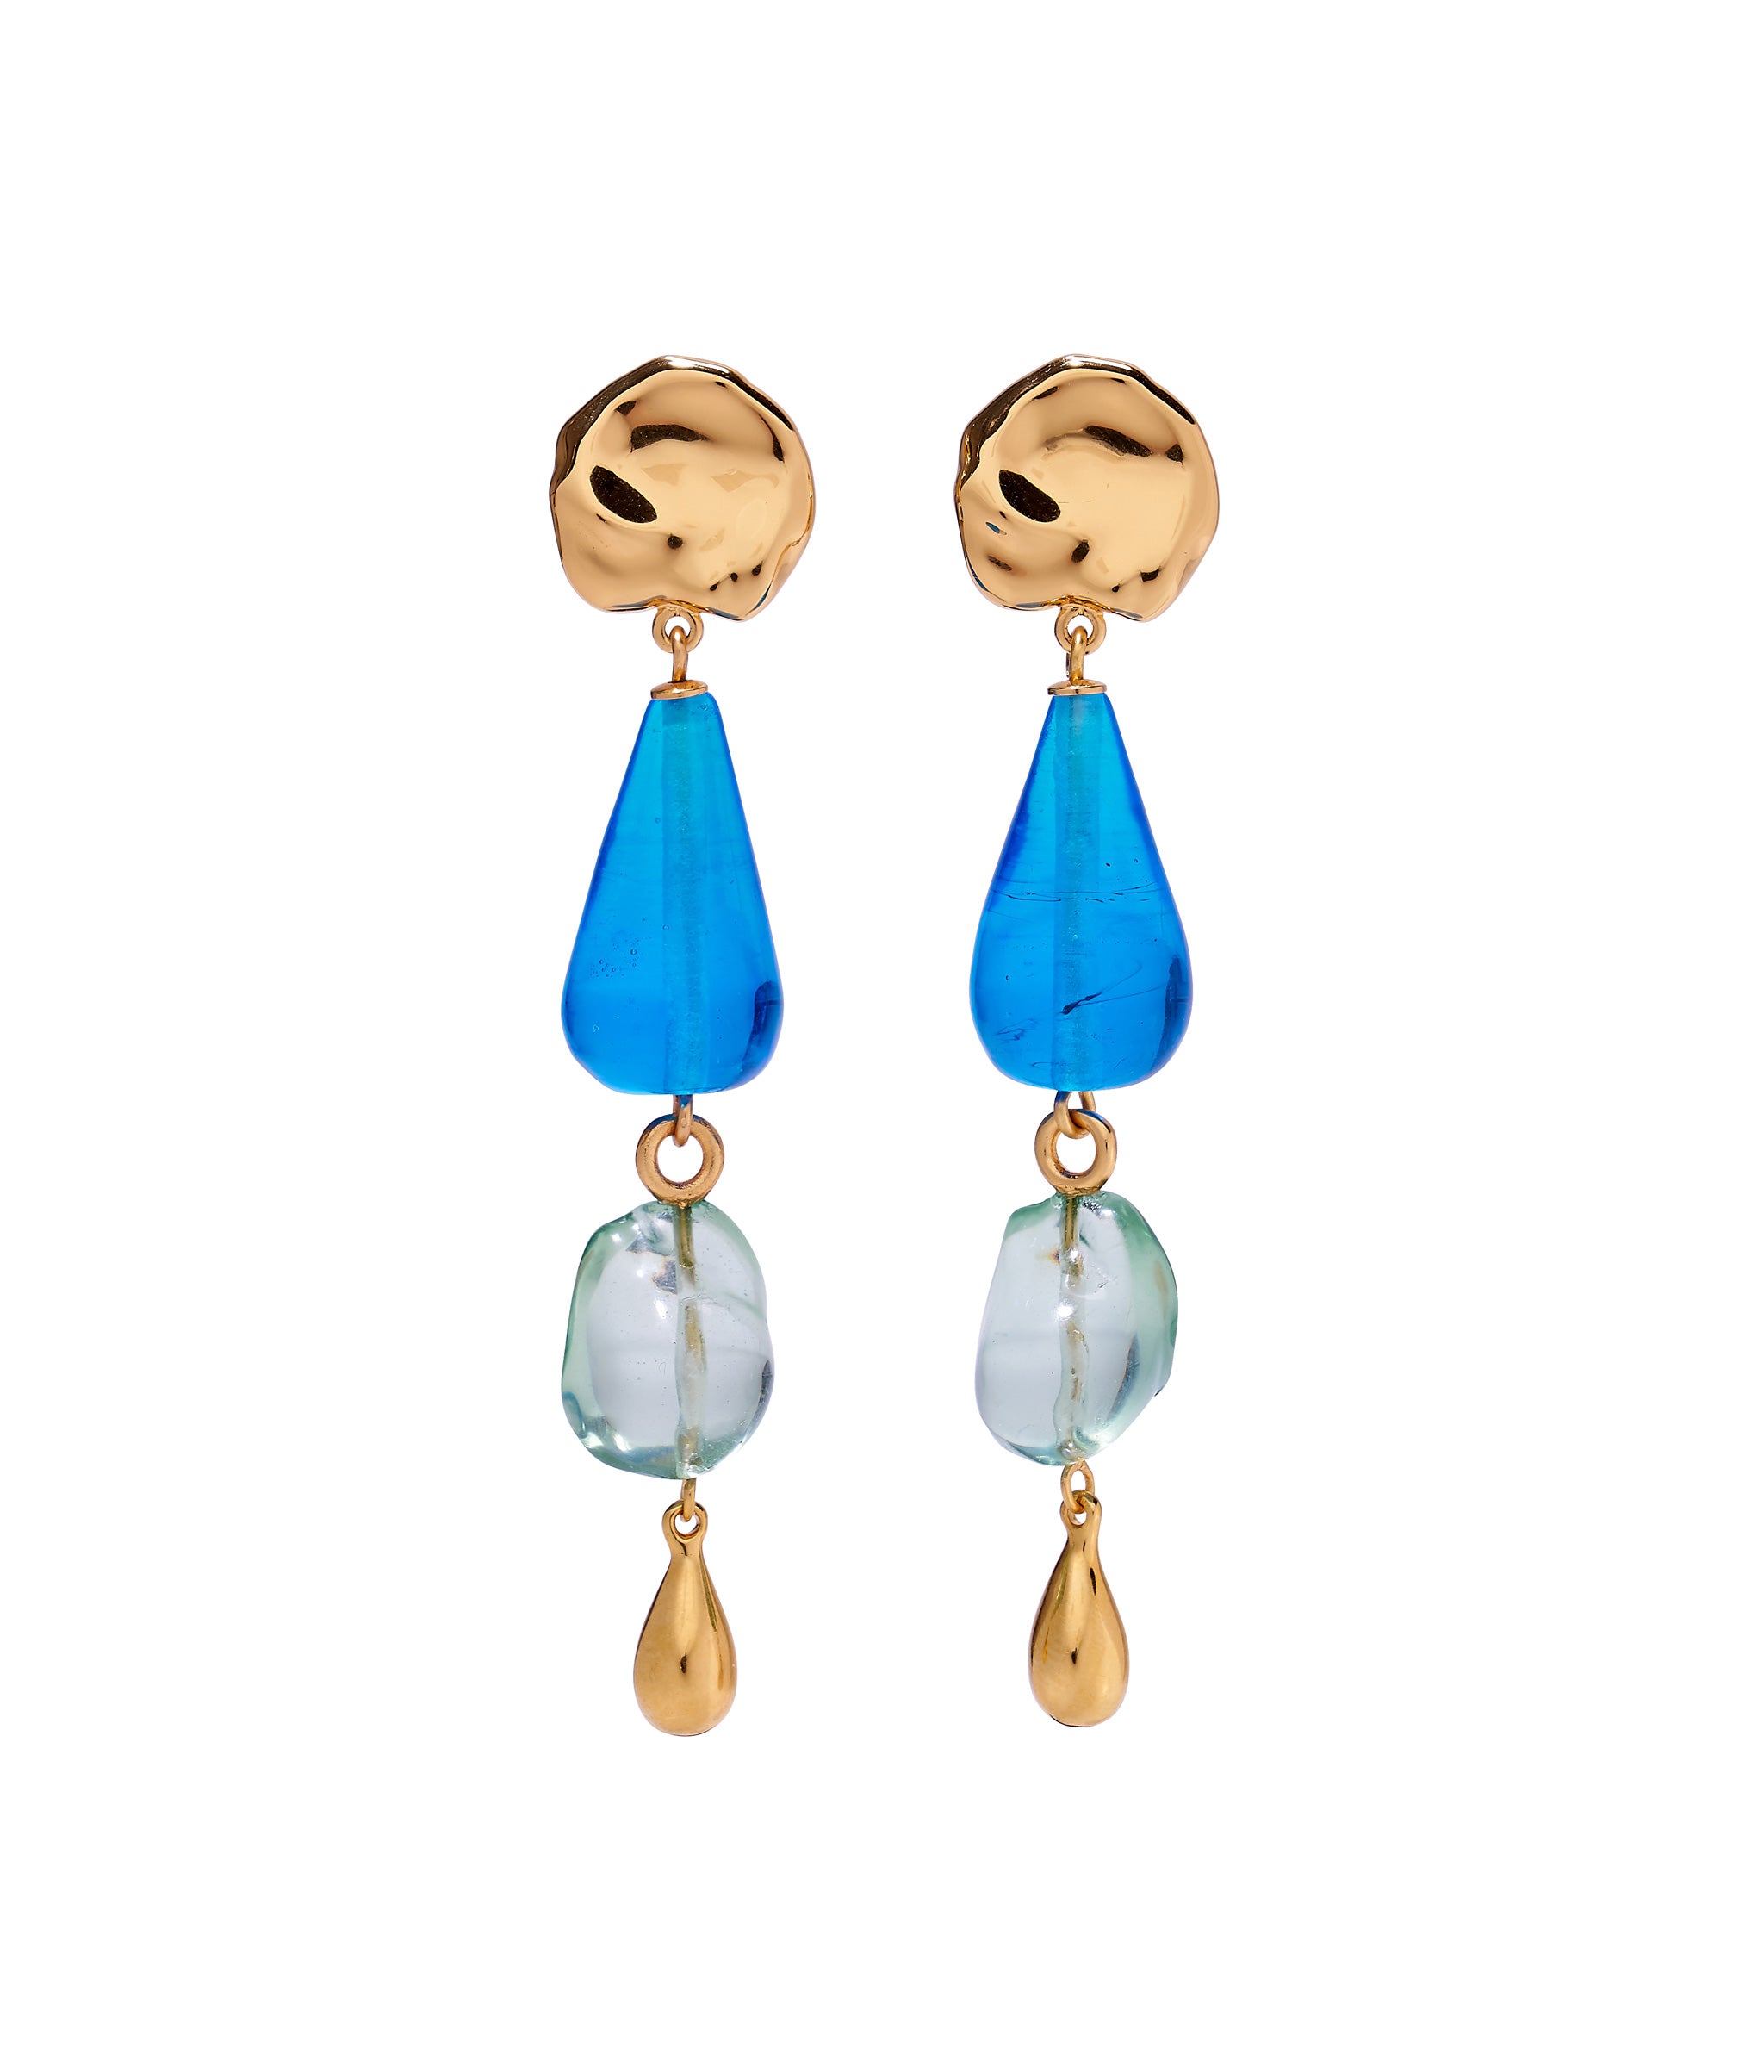 Palma Earrings. Long earrings with gold coin tops, linked blue glass and aqua resin beads, and gold drops.